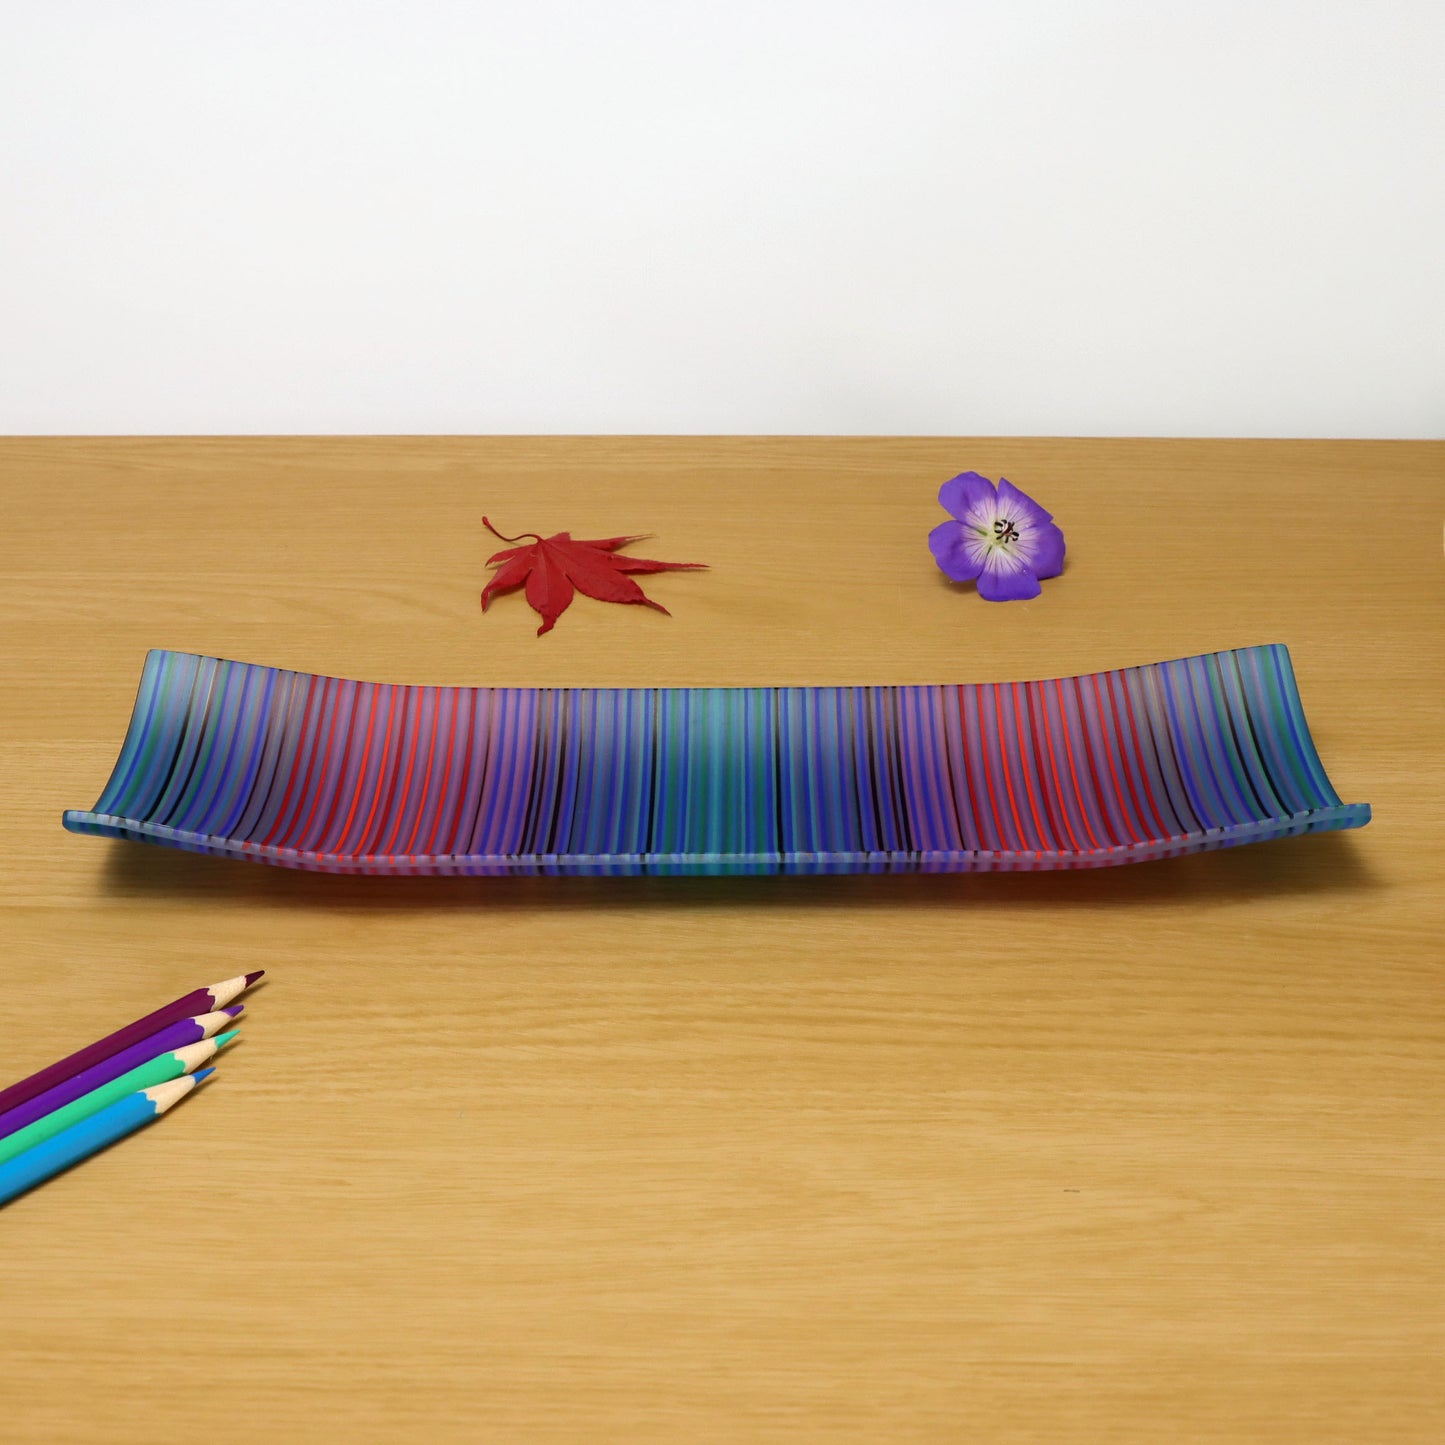 A ColourWave Glass fused glass plate with vibrant vertical stripes in a spectrum of colours ranging from red, blue, green to purple. The rectangular plate features corners that gently curve upwards, giving it a sophisticated and contemporary shape. The plate is displayed on a wooden surface, accompanied by a red maple leaf, a purple flower, and a set of coloured pencils to the bottom left corner, enhancing its artistic allure.